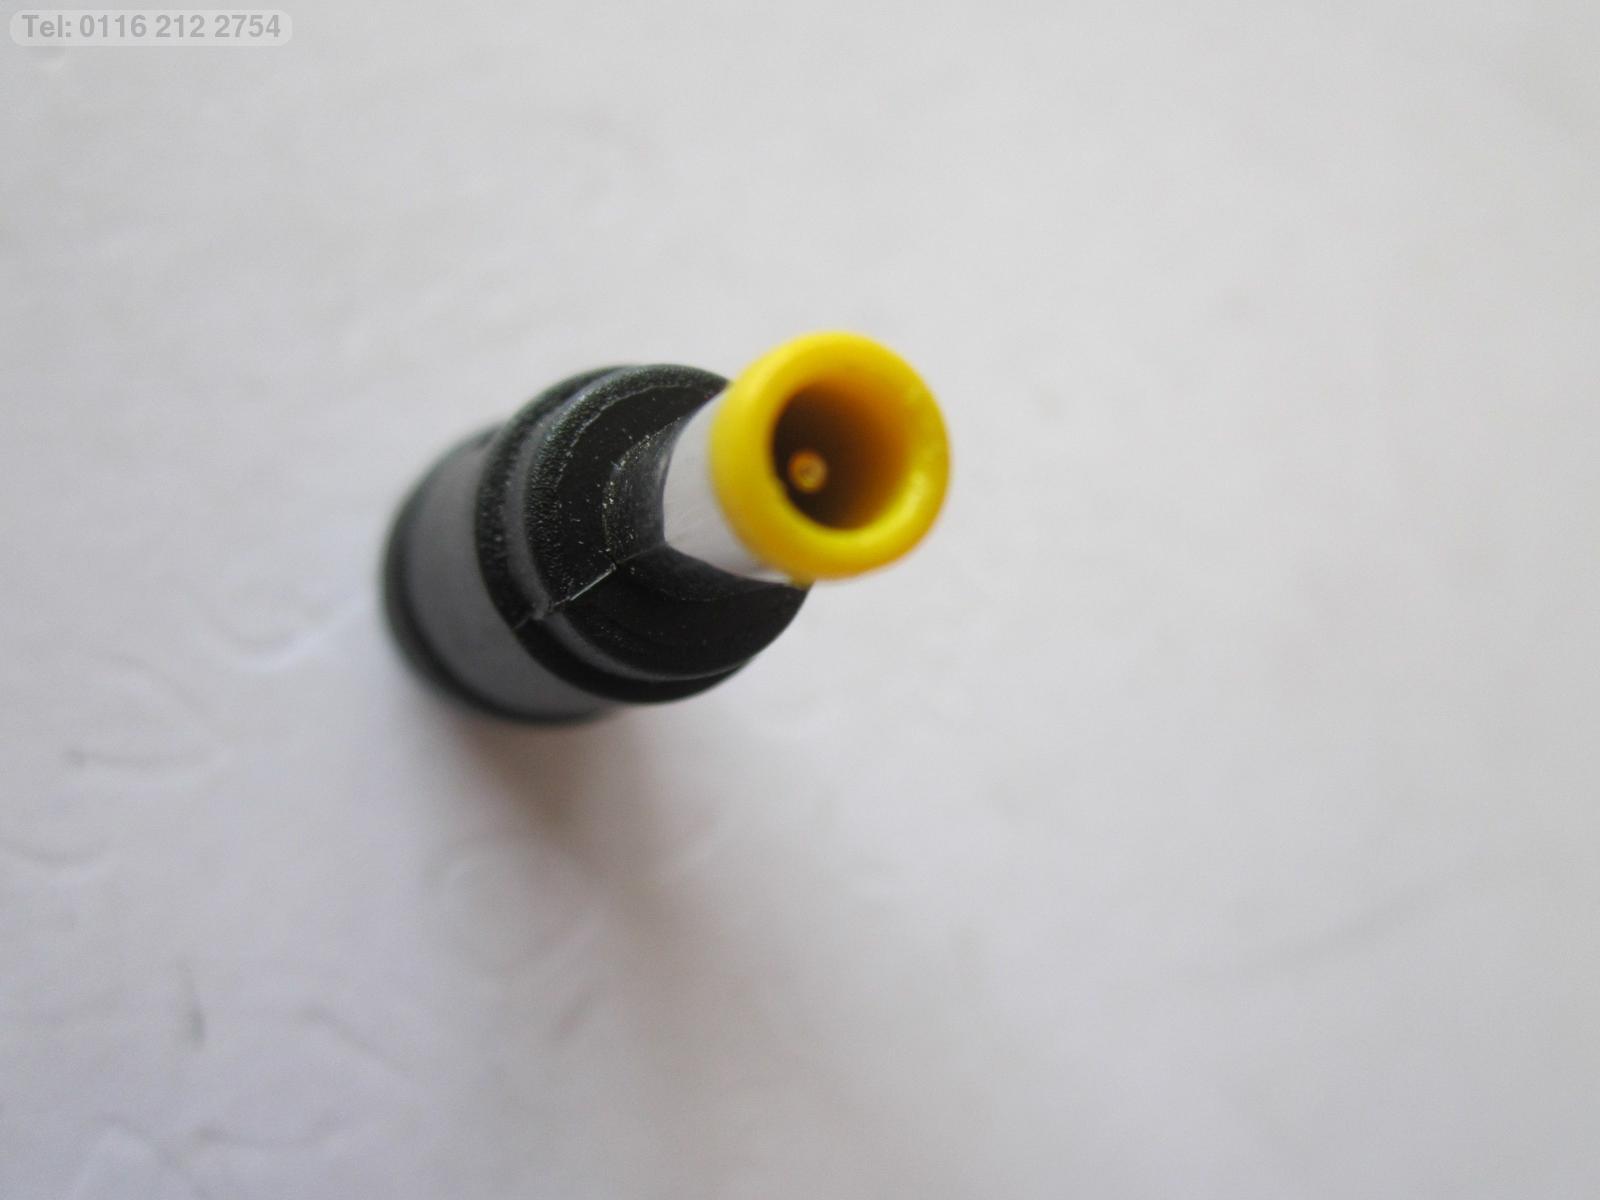 Female 5.5mm 2.1mm to DC Power Plug Tip Attachment 5.0mmx3.3mm 5x3.3 Centre Pin